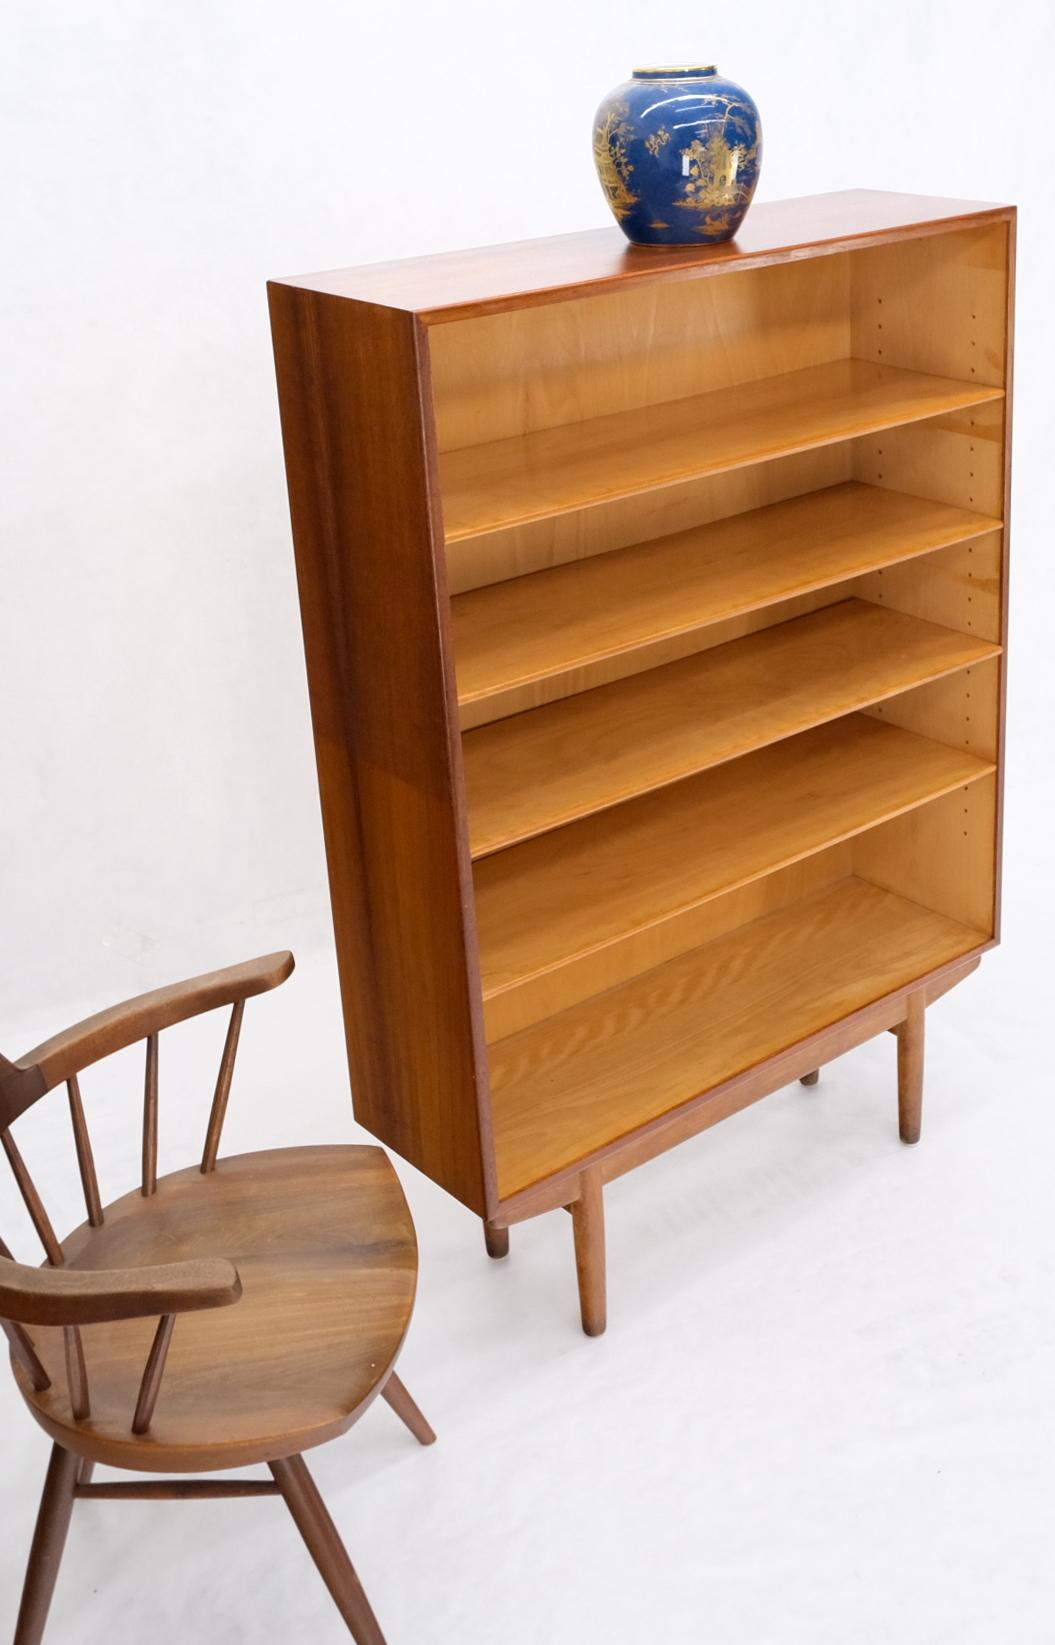 5 foot wide bookcase